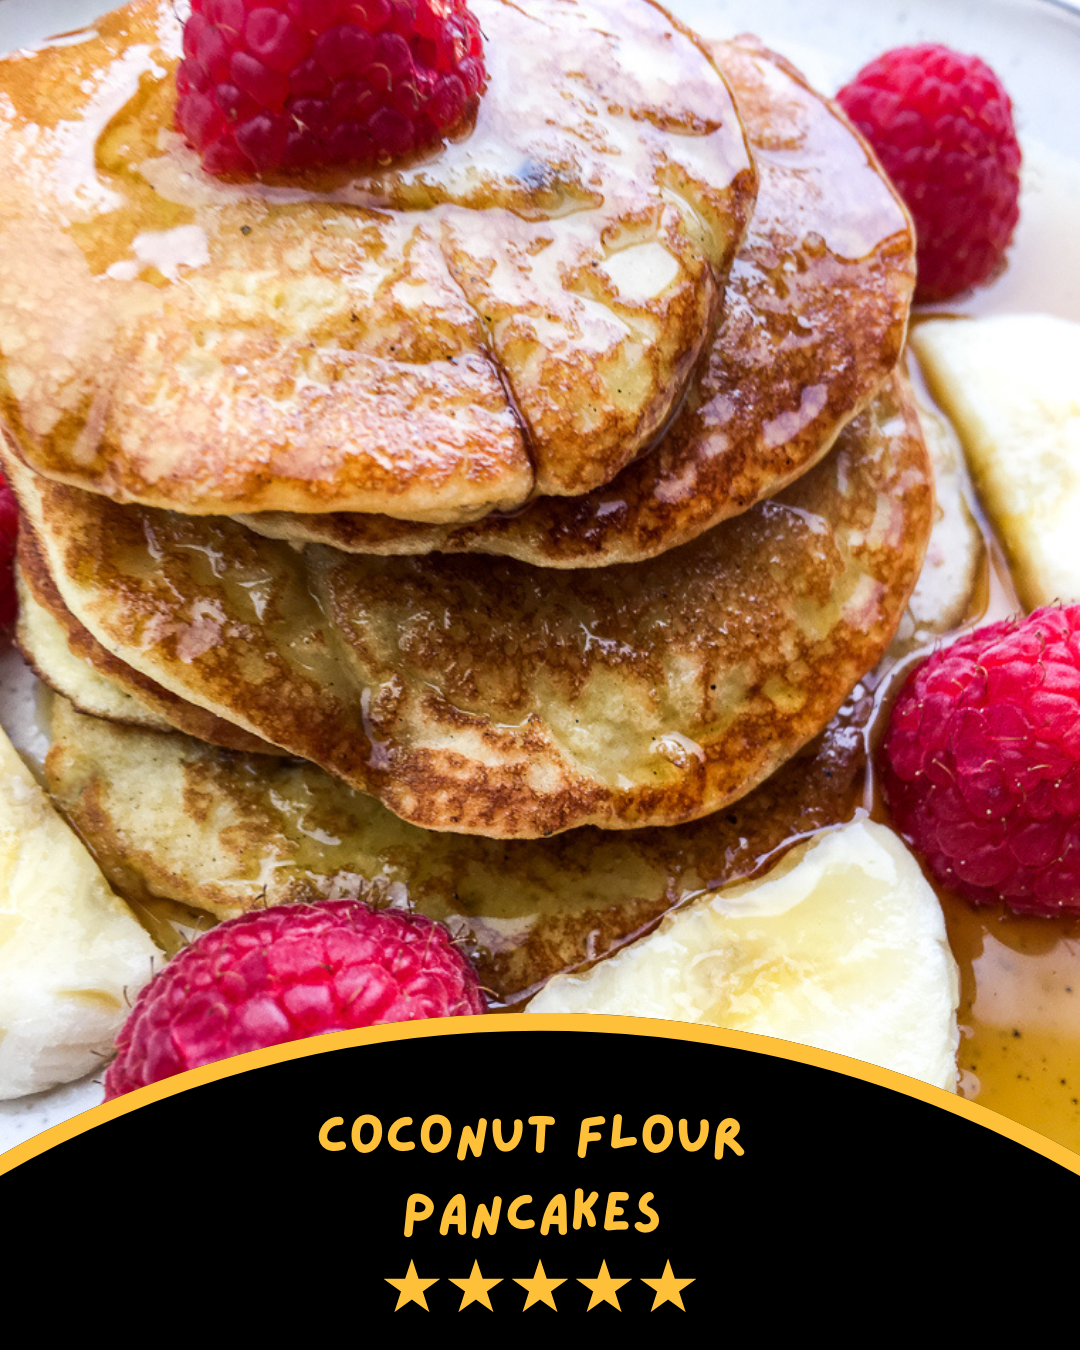 Enjoy a blissful breakfast with these fluffy coconut flour pancakes! 🥥✨ Full of rich coconut flavor, they’re the perfect way to start your day. Whether it’s a special weekend brunch or a quick weekday treat, these pancakes will bring a smile to your face. 😋🥞 #CoconutFlour #BreakfastJoy